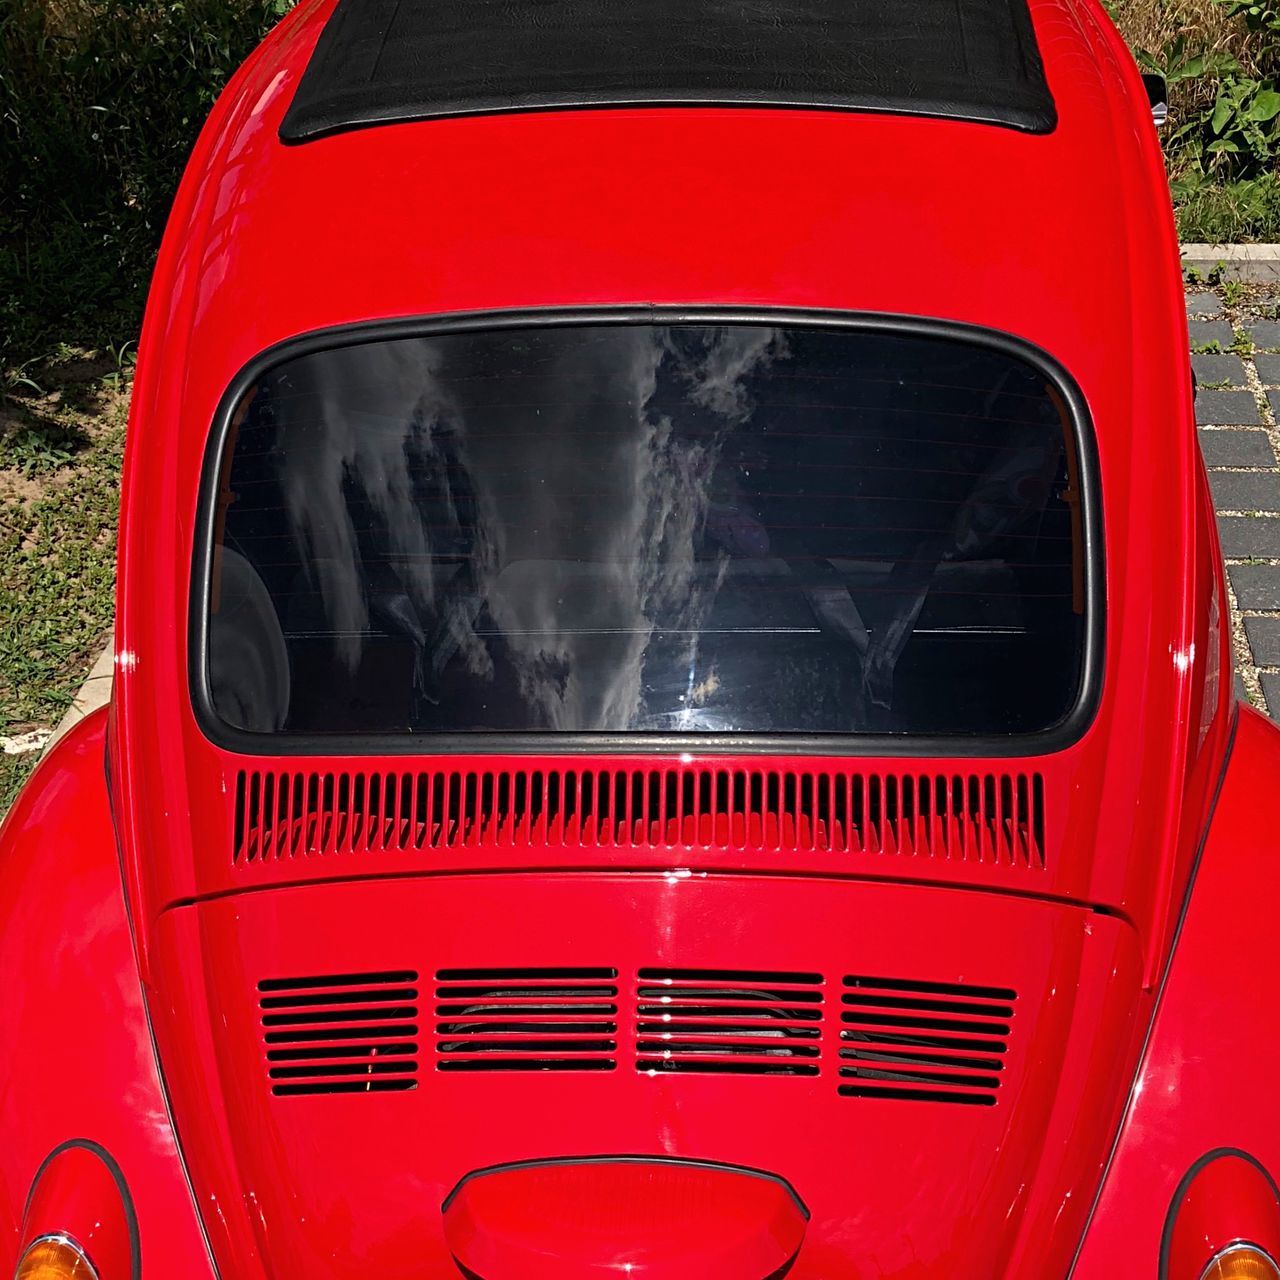 CLOSE-UP OF RED VINTAGE CAR